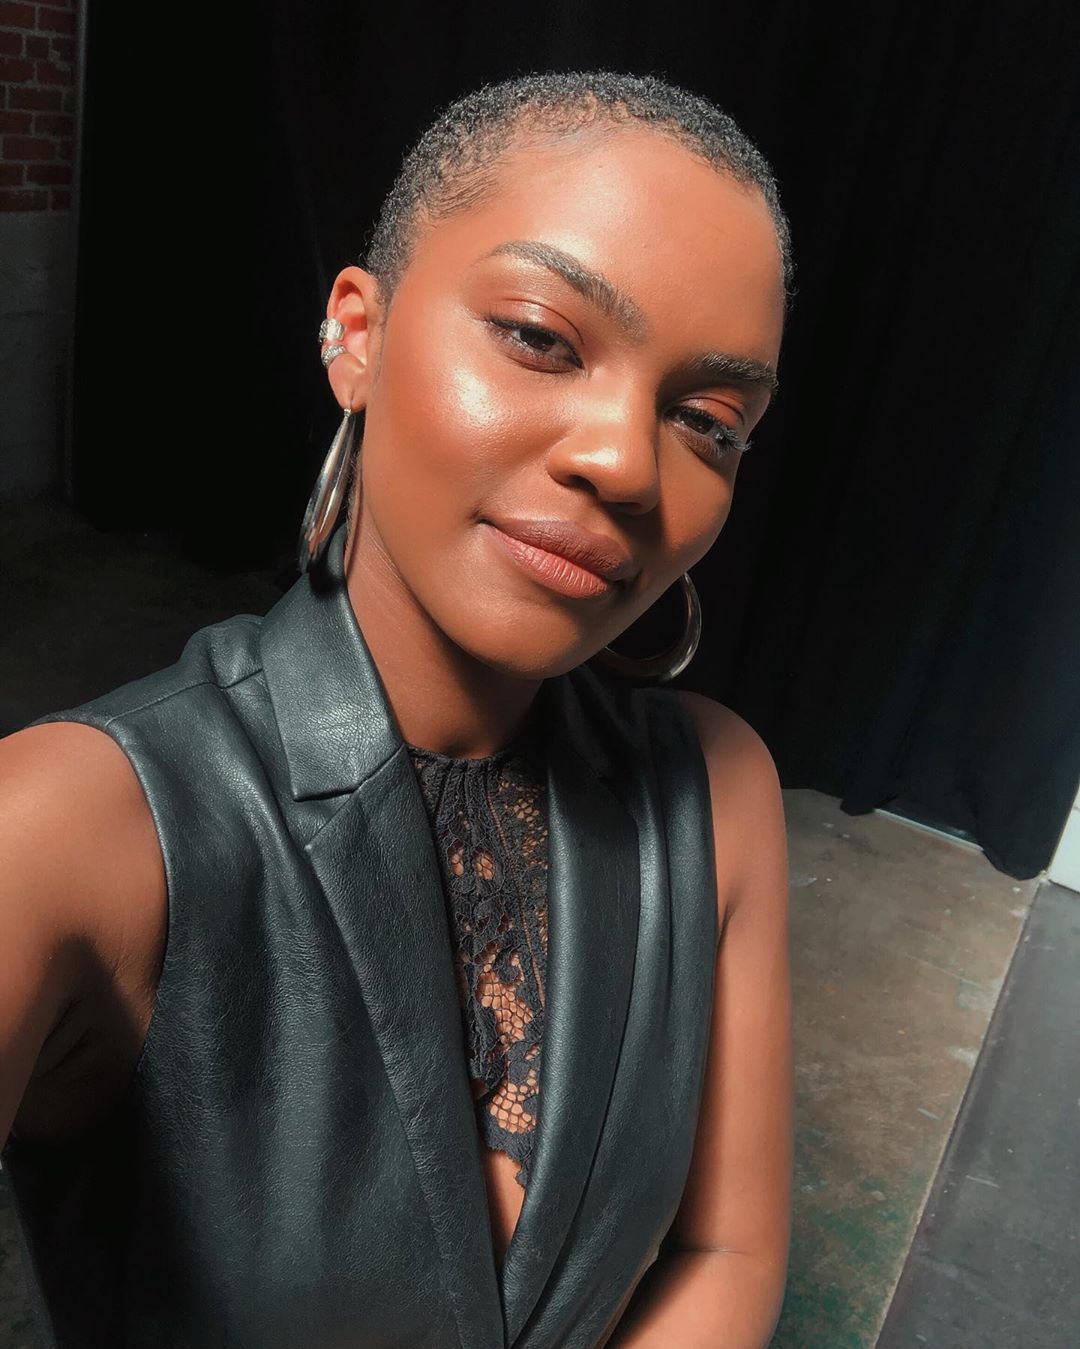 Celebs who nailed the baldie look